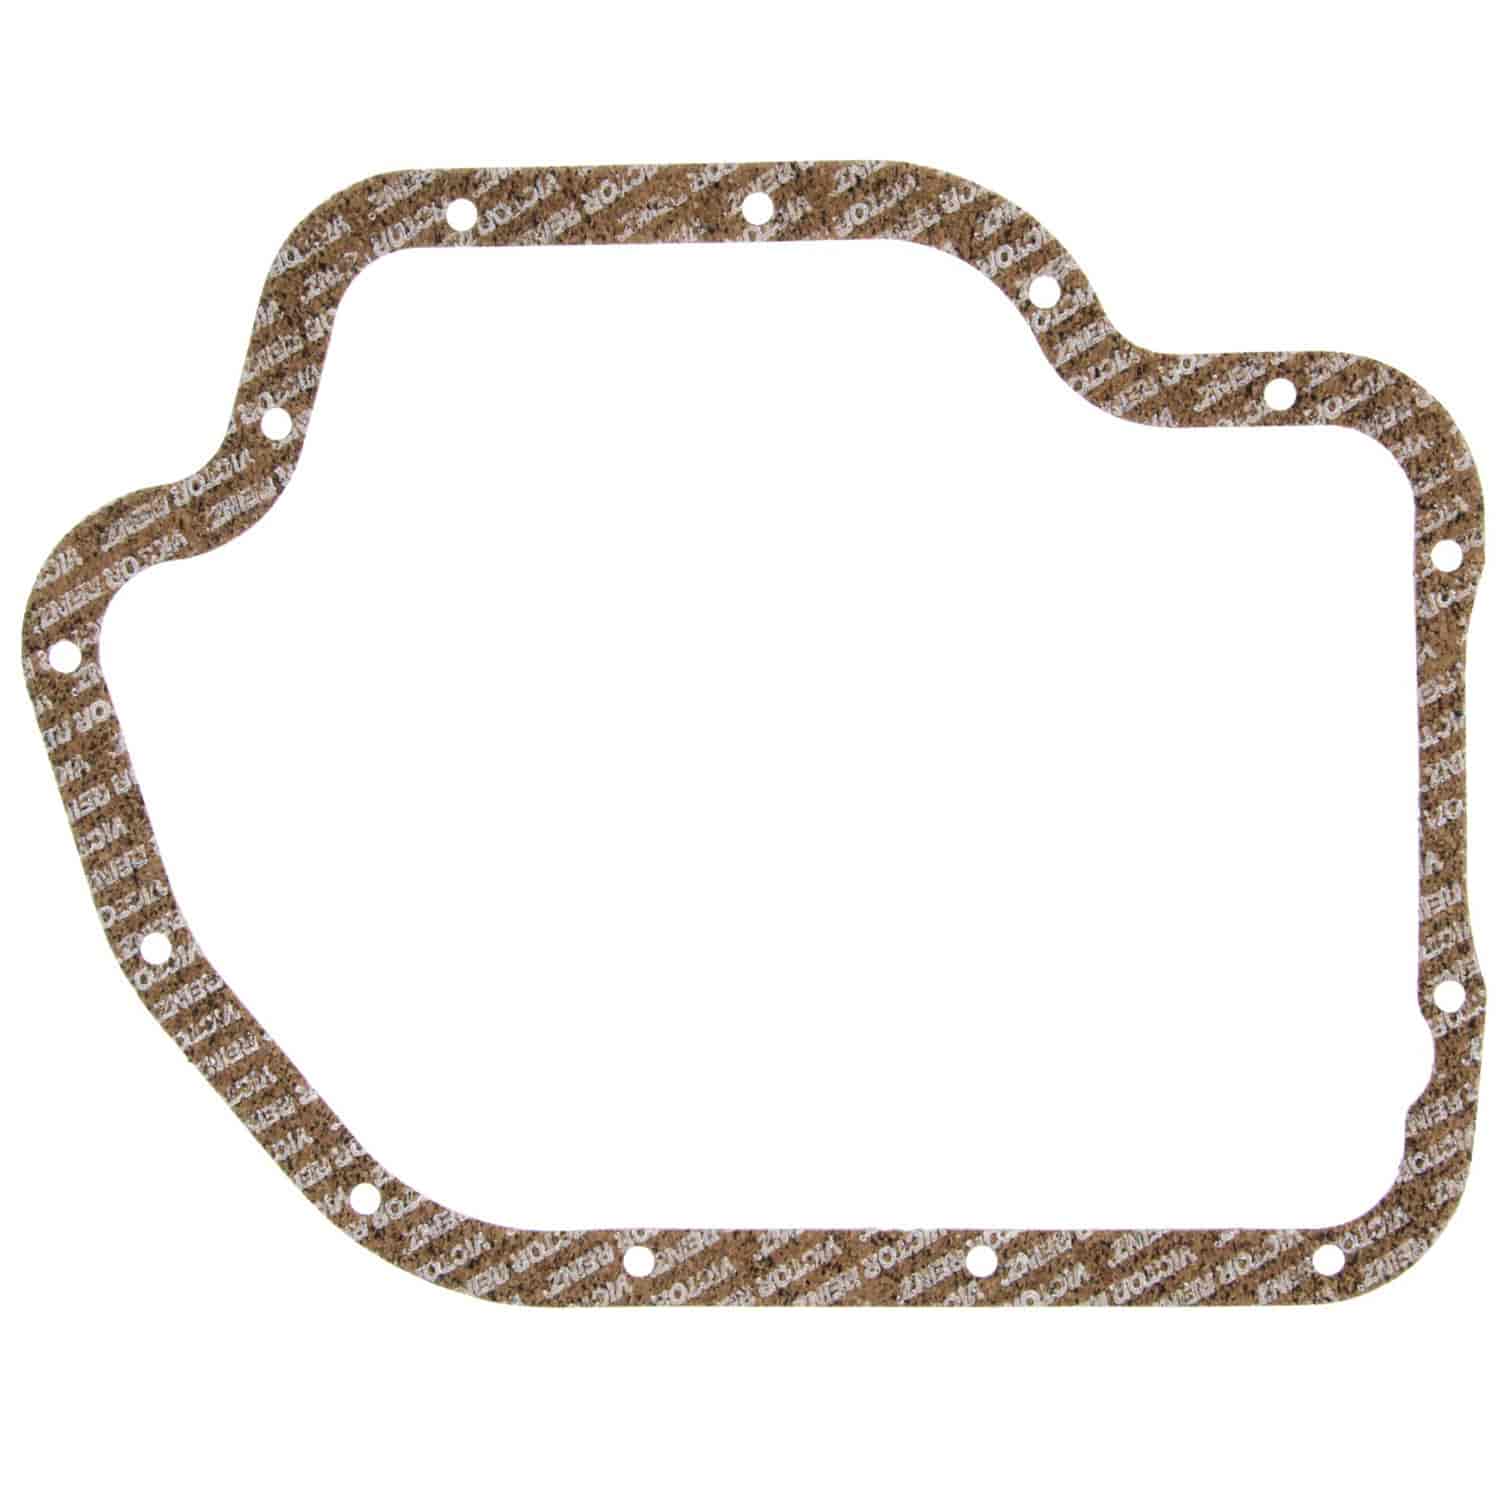 Automatic Transmission Gasket Bui Cad Chev-Pass&Trk GMC Jeep